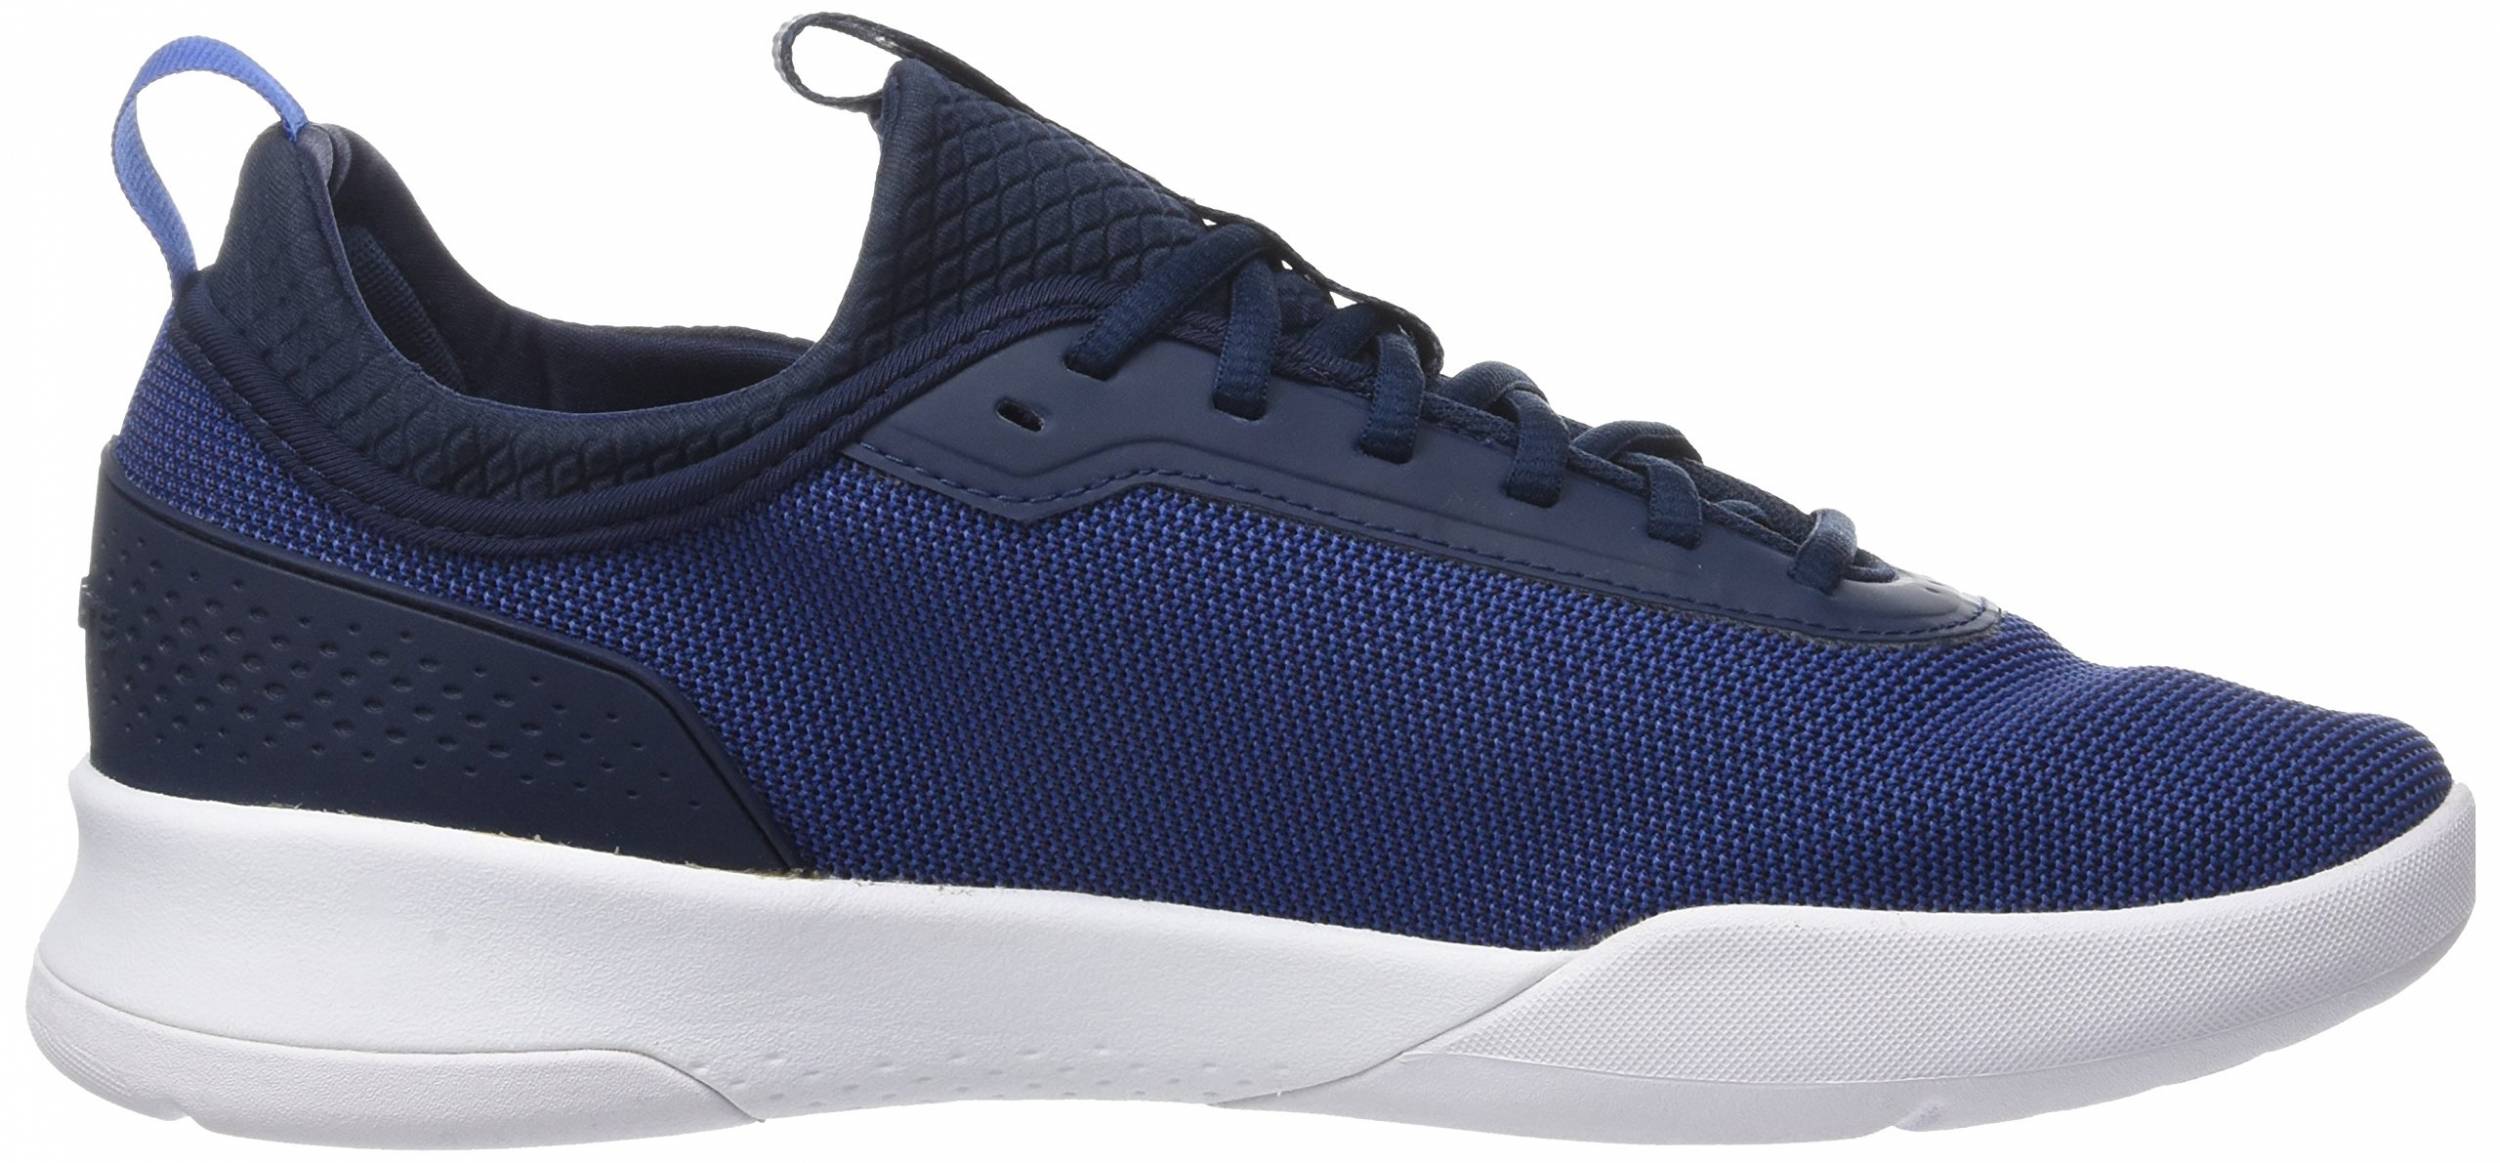 Lacoste LT Spirit 2.0 sneakers (only $70) | RunRepeat